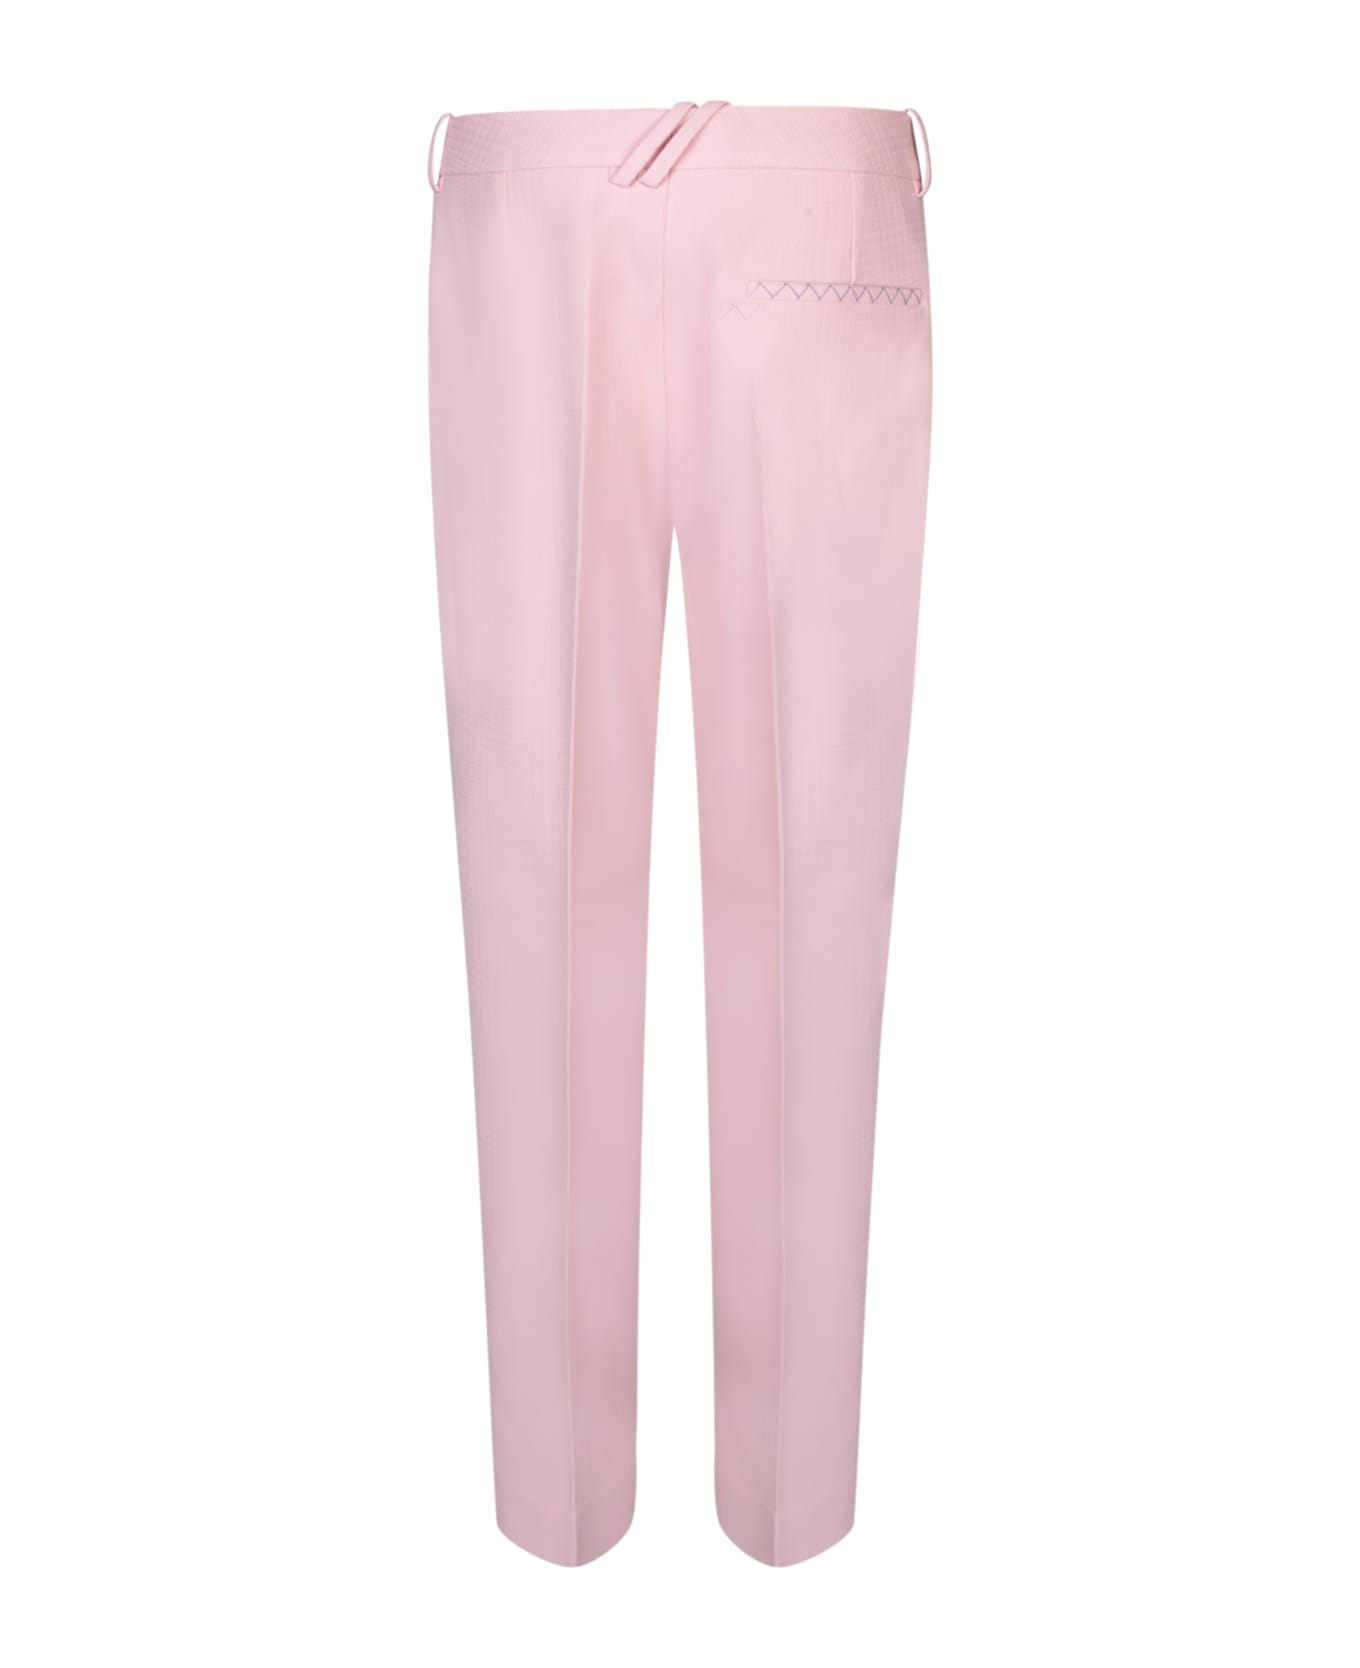 Burberry Wool Tailored Trousers - PINK